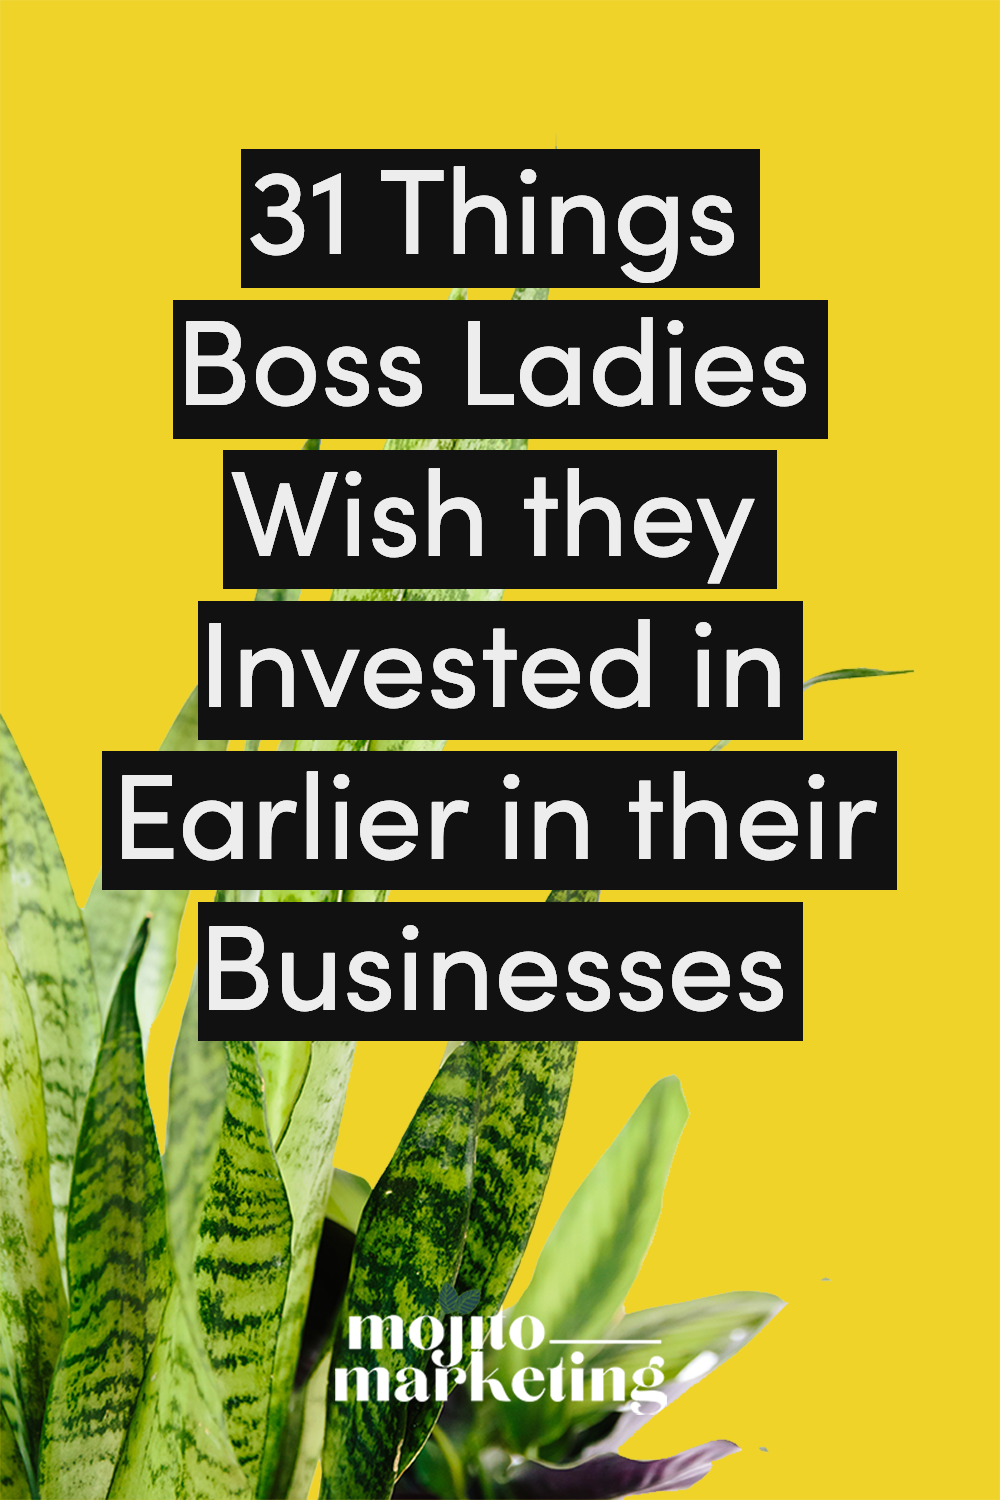 31_Things_Boss_Ladies_Wish_they_Invested_in_Earlier_in_their_Businesses_b.png